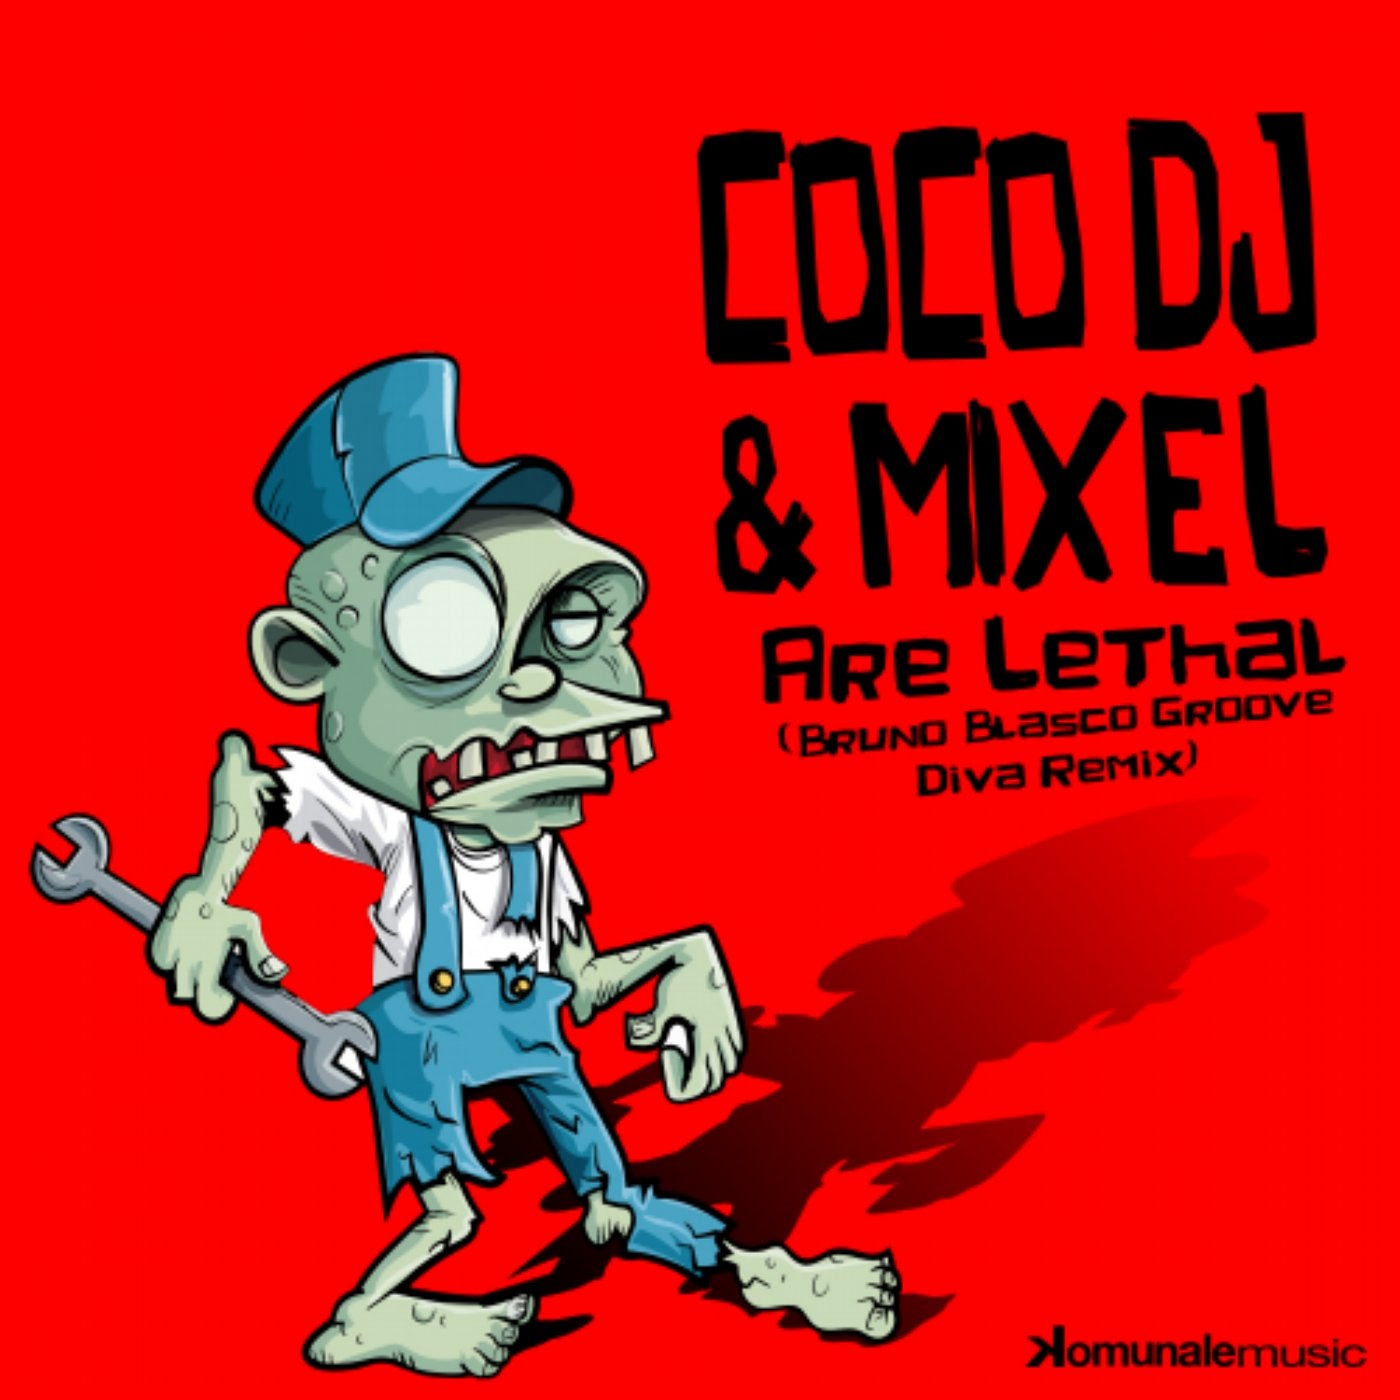 Are Lethal Remixes